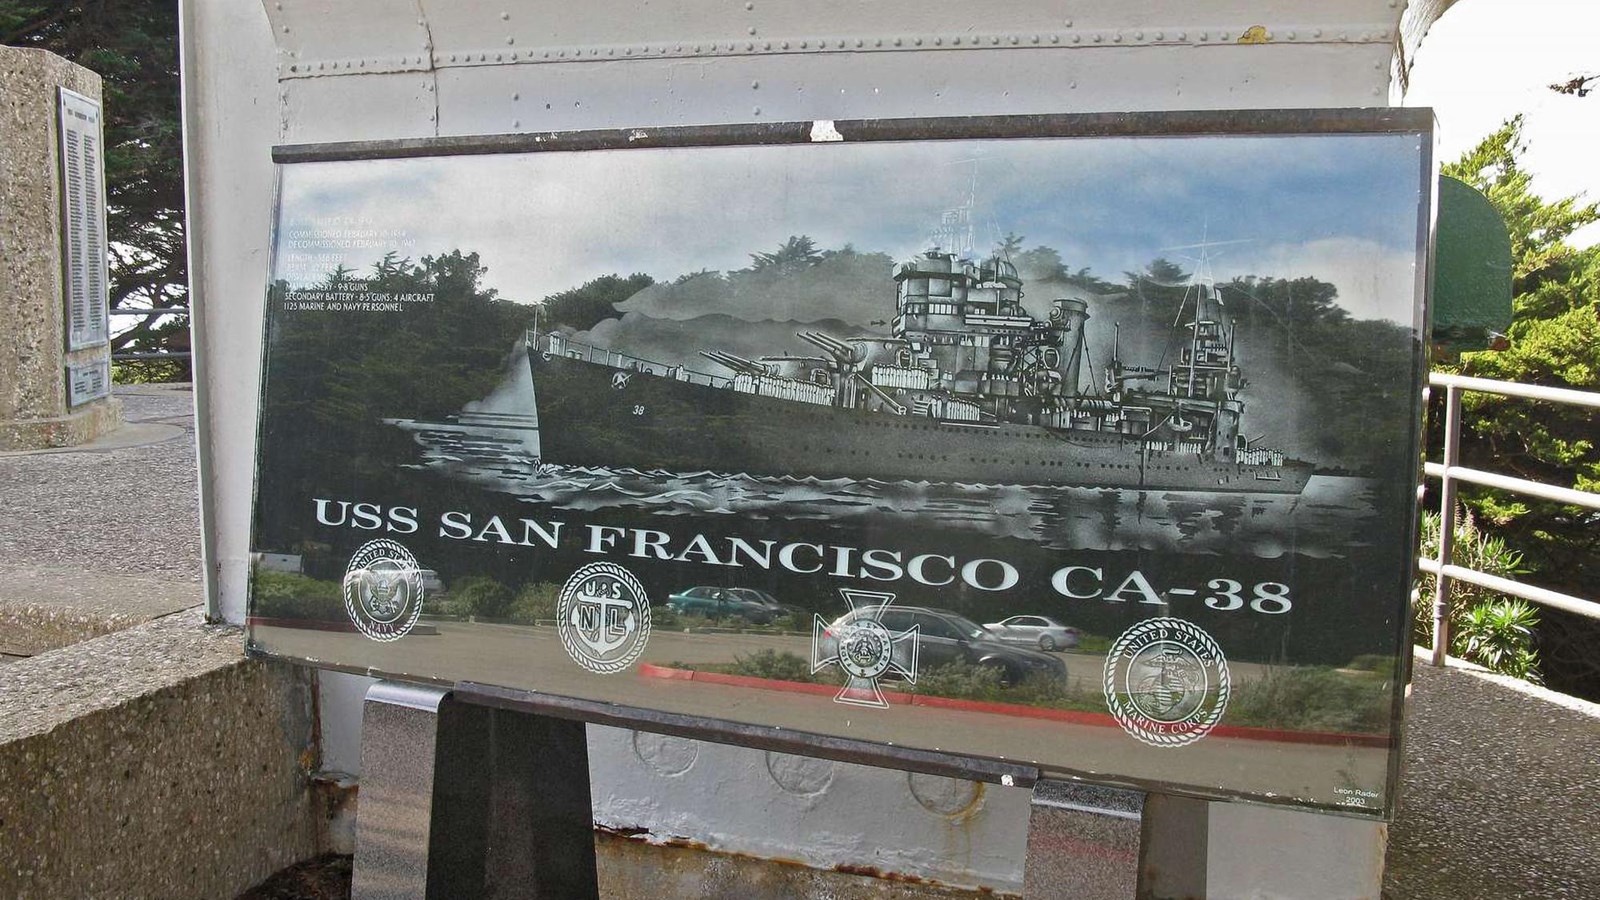  An image of the USS San Francisco etched on black granite.